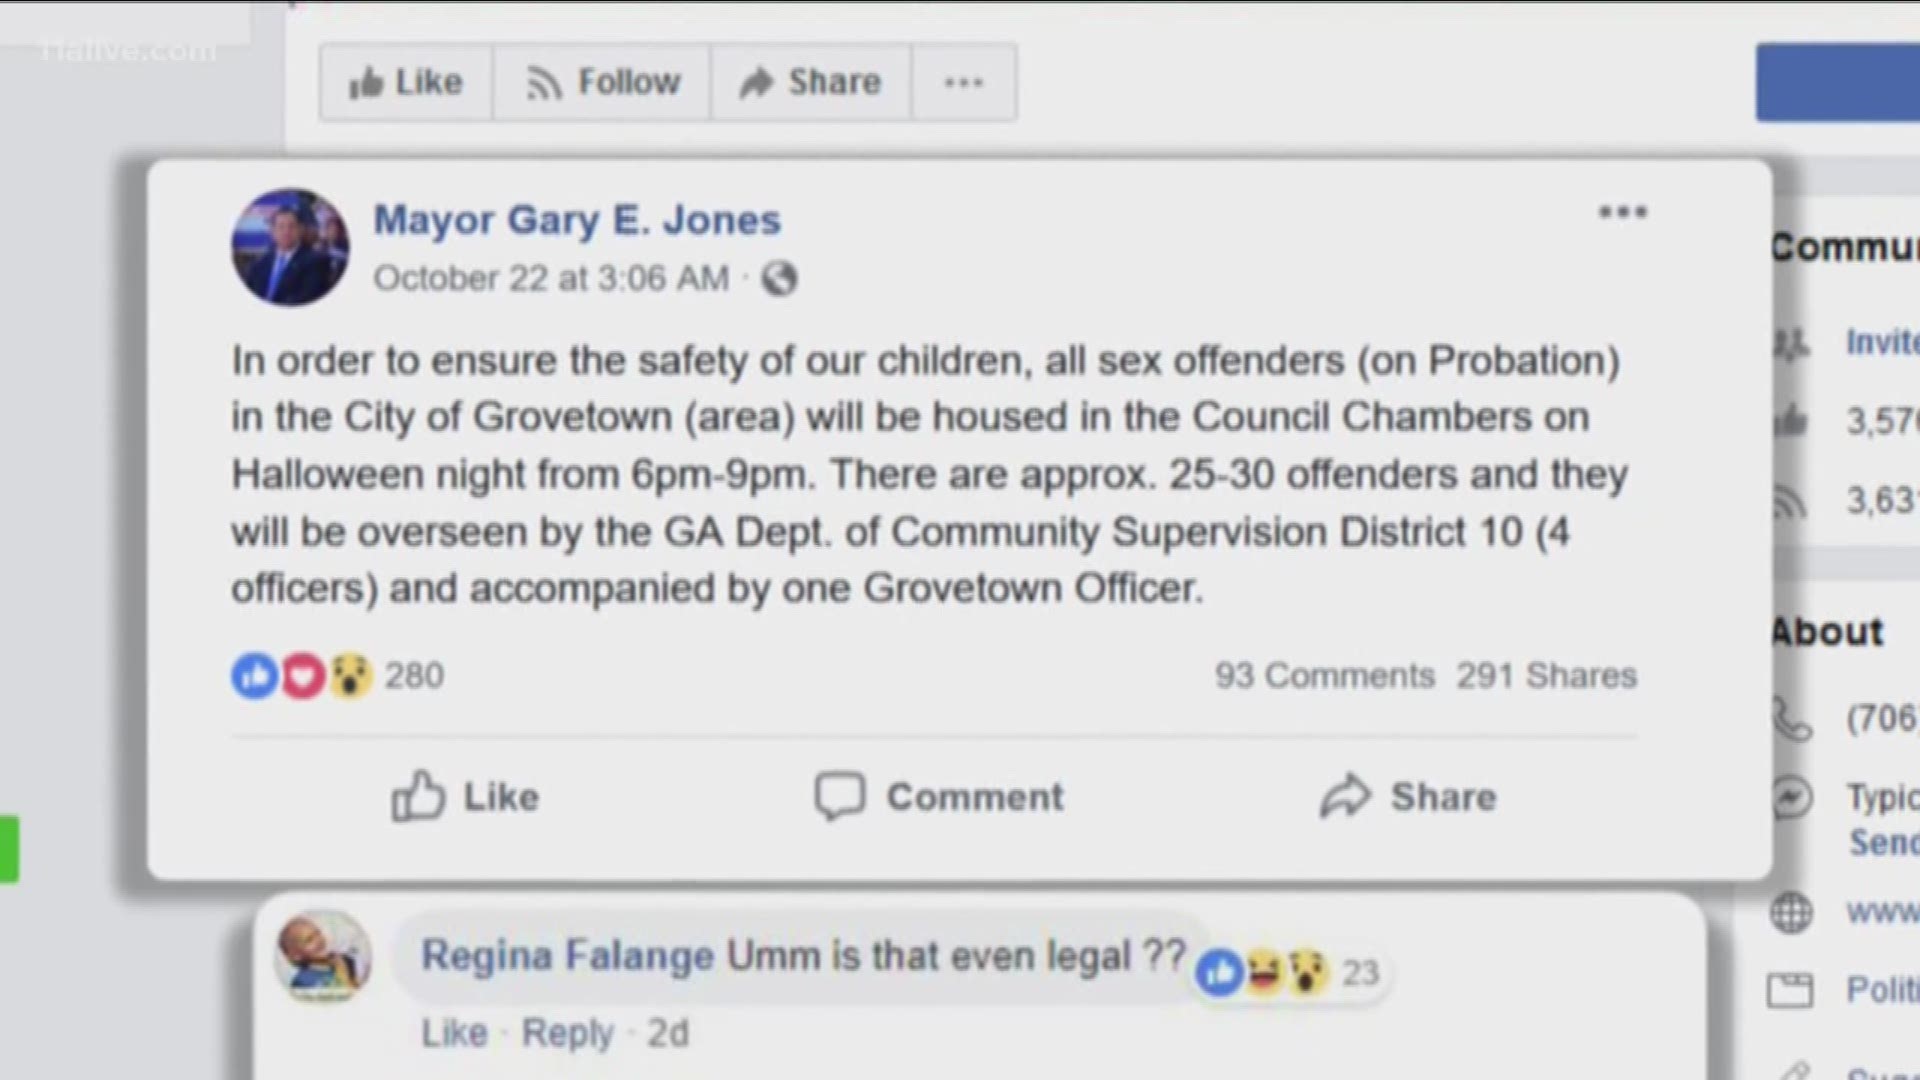 Mayor of Grovetown Gary E. Jones made the announcement on his Facebook page, stirring quite a debate.